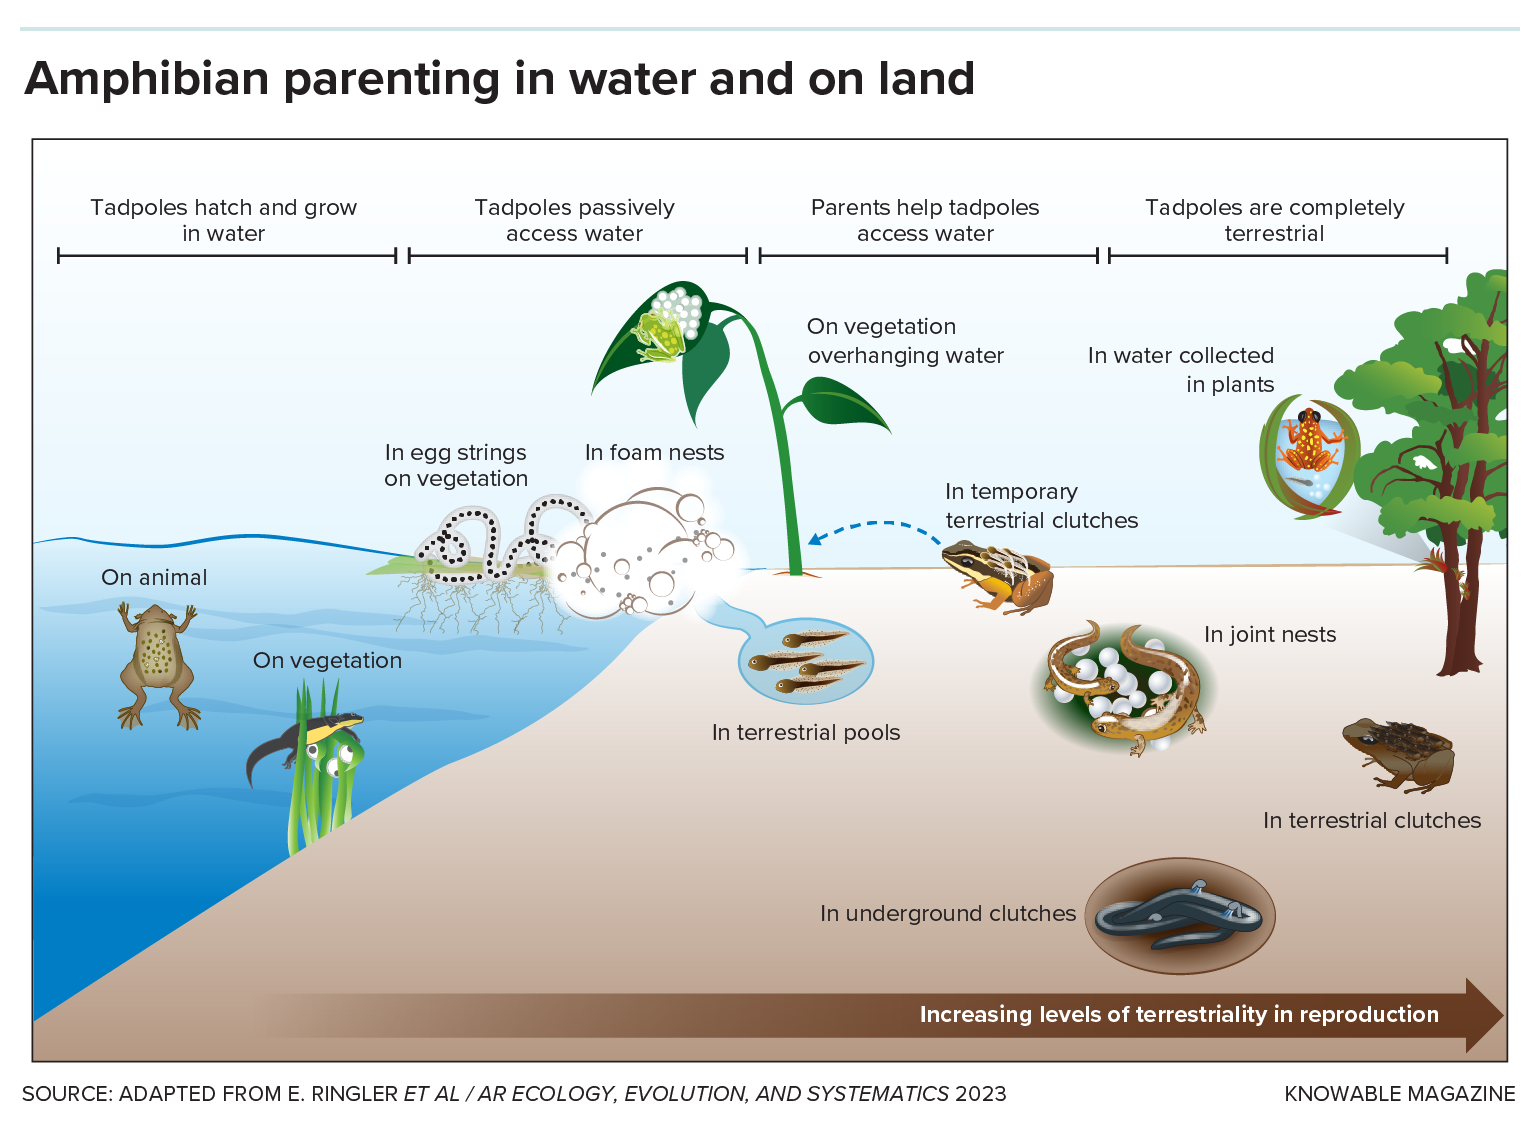 Graphic depicts amphibian parenting behavior. Examples: In water, tadpoles can be carried on parents, cared for on vegetation or in foam nests. On land, they may be cared for in small pools, joint nests or overground/underground clutches.